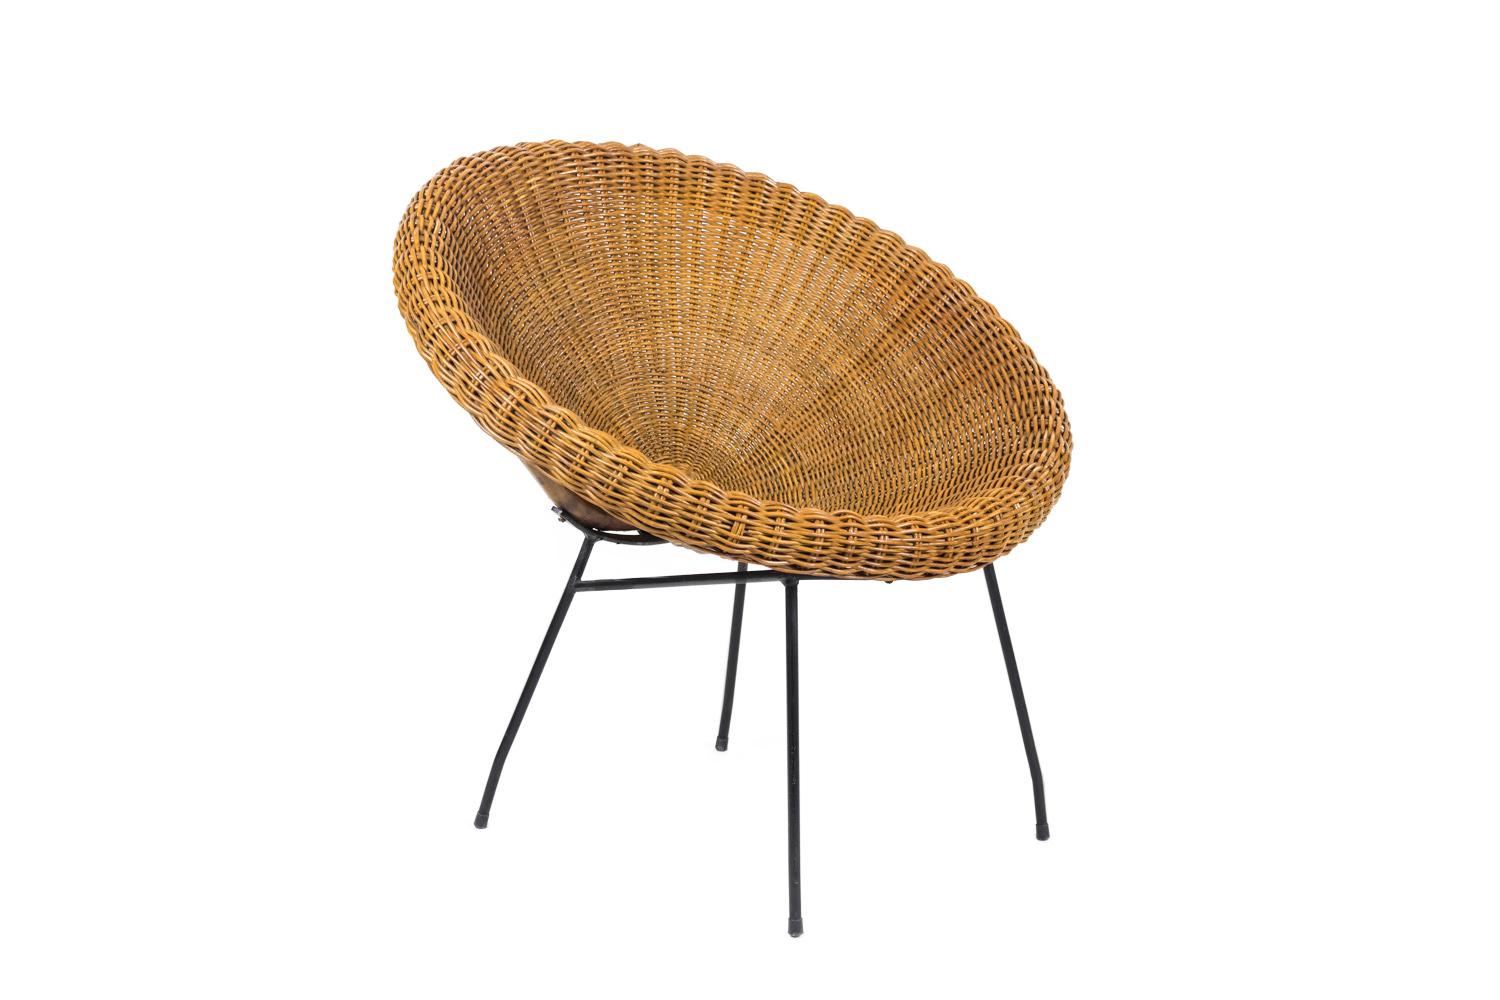 Janine Abraham & Dirk Jan Rol, in the style of.

Pair of sun chairs in wicker and black lacquered metal tubular legs fixed on two large wicker sticks crossed on the seat back. Back and seat formed a sun thanks to braided wicker sticks.

Work